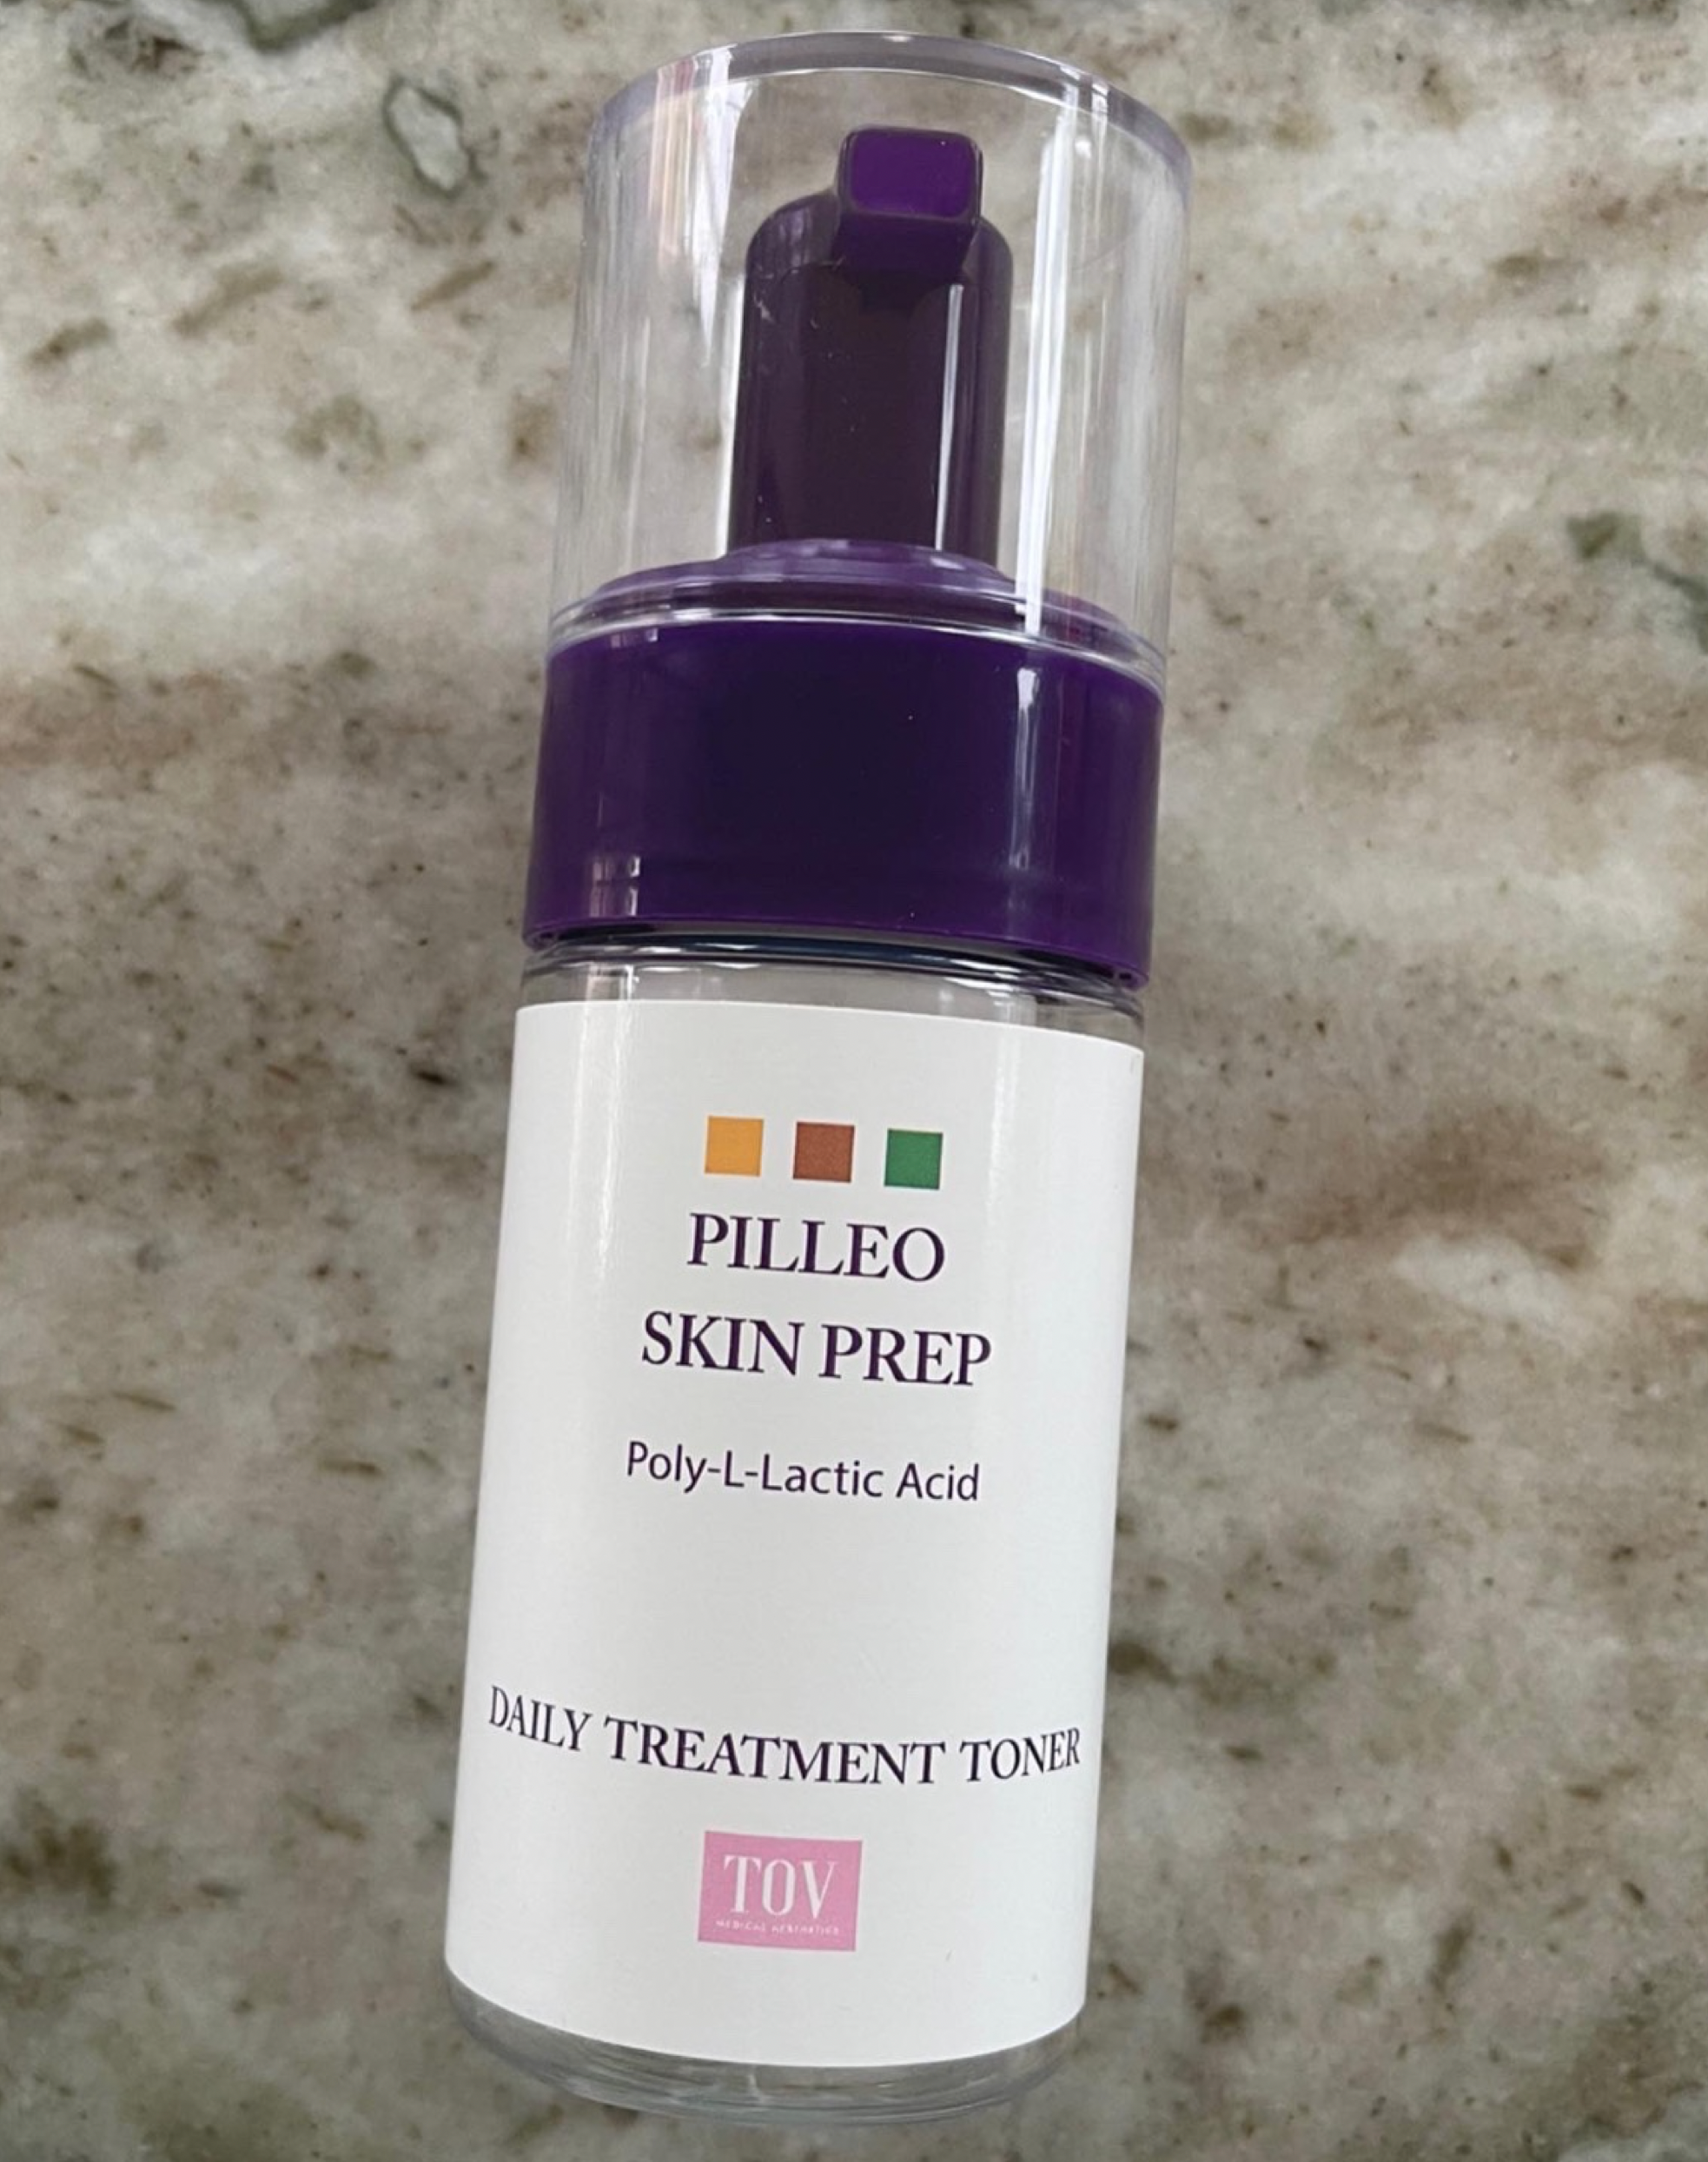 HOUSE OF PLLA® HOP+ Pilleo Skin Prep Retail $95 - Daily Refining Complex (Toner) - SPECIAL OFFER